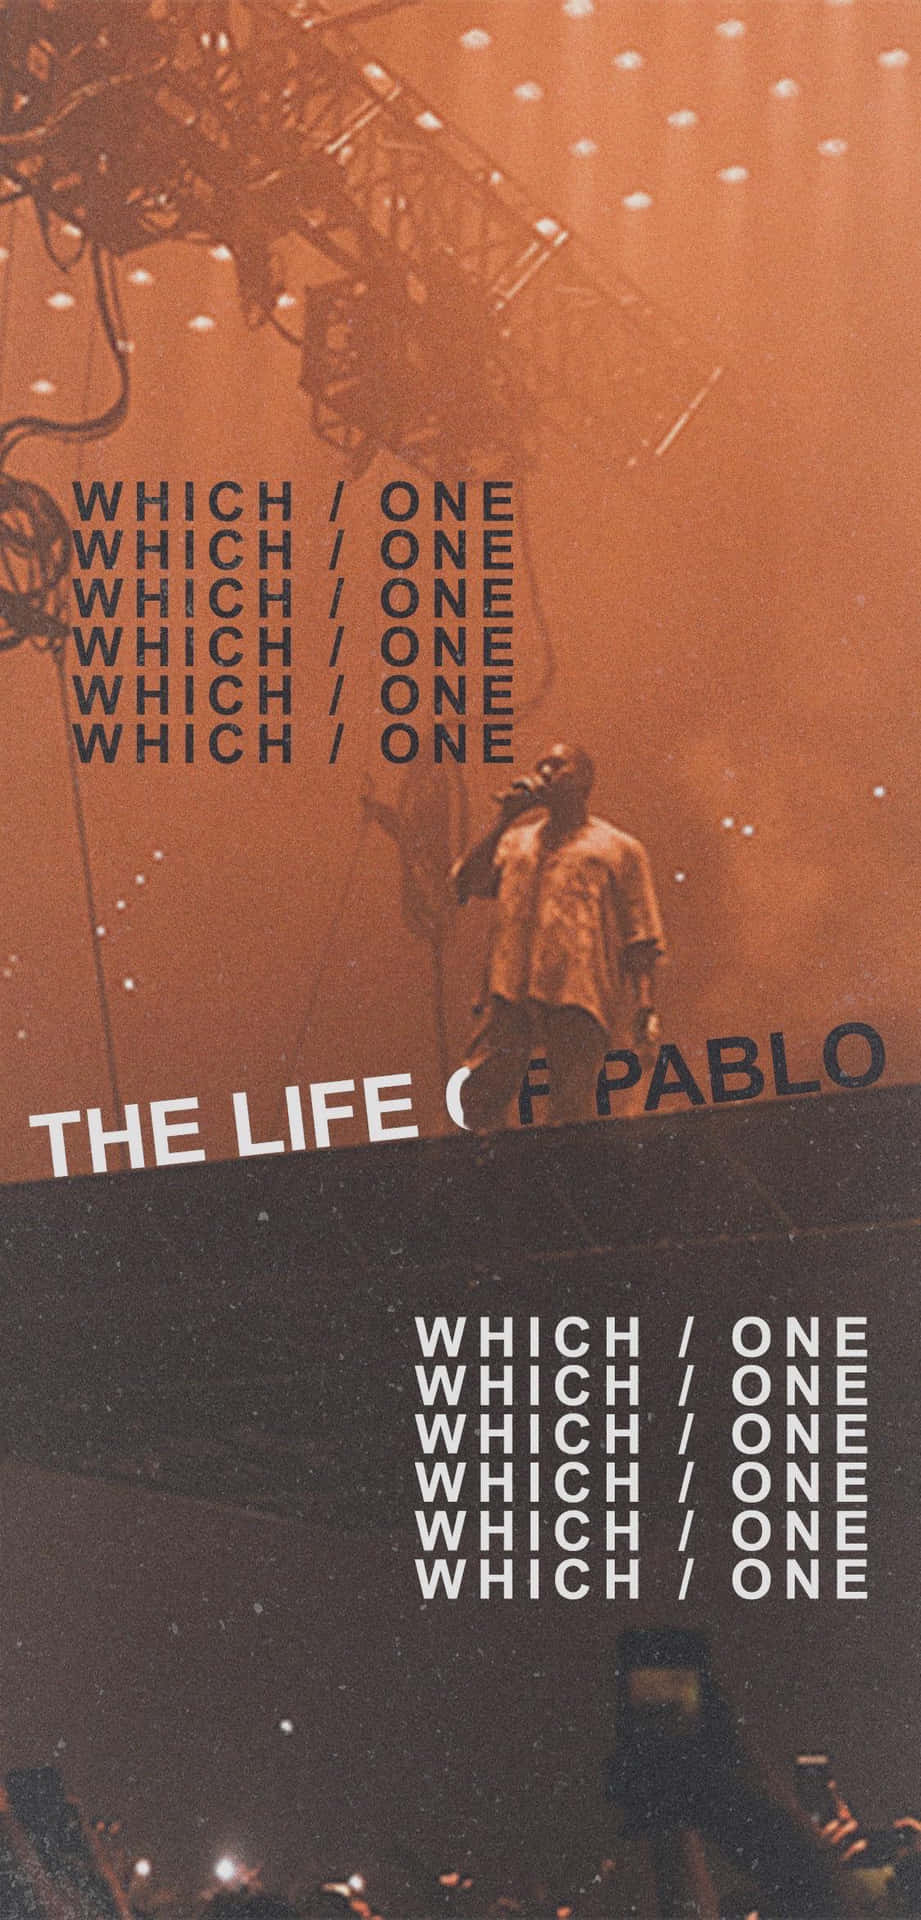 "The Life of Pablo: an Ode to Creative Expression" Wallpaper